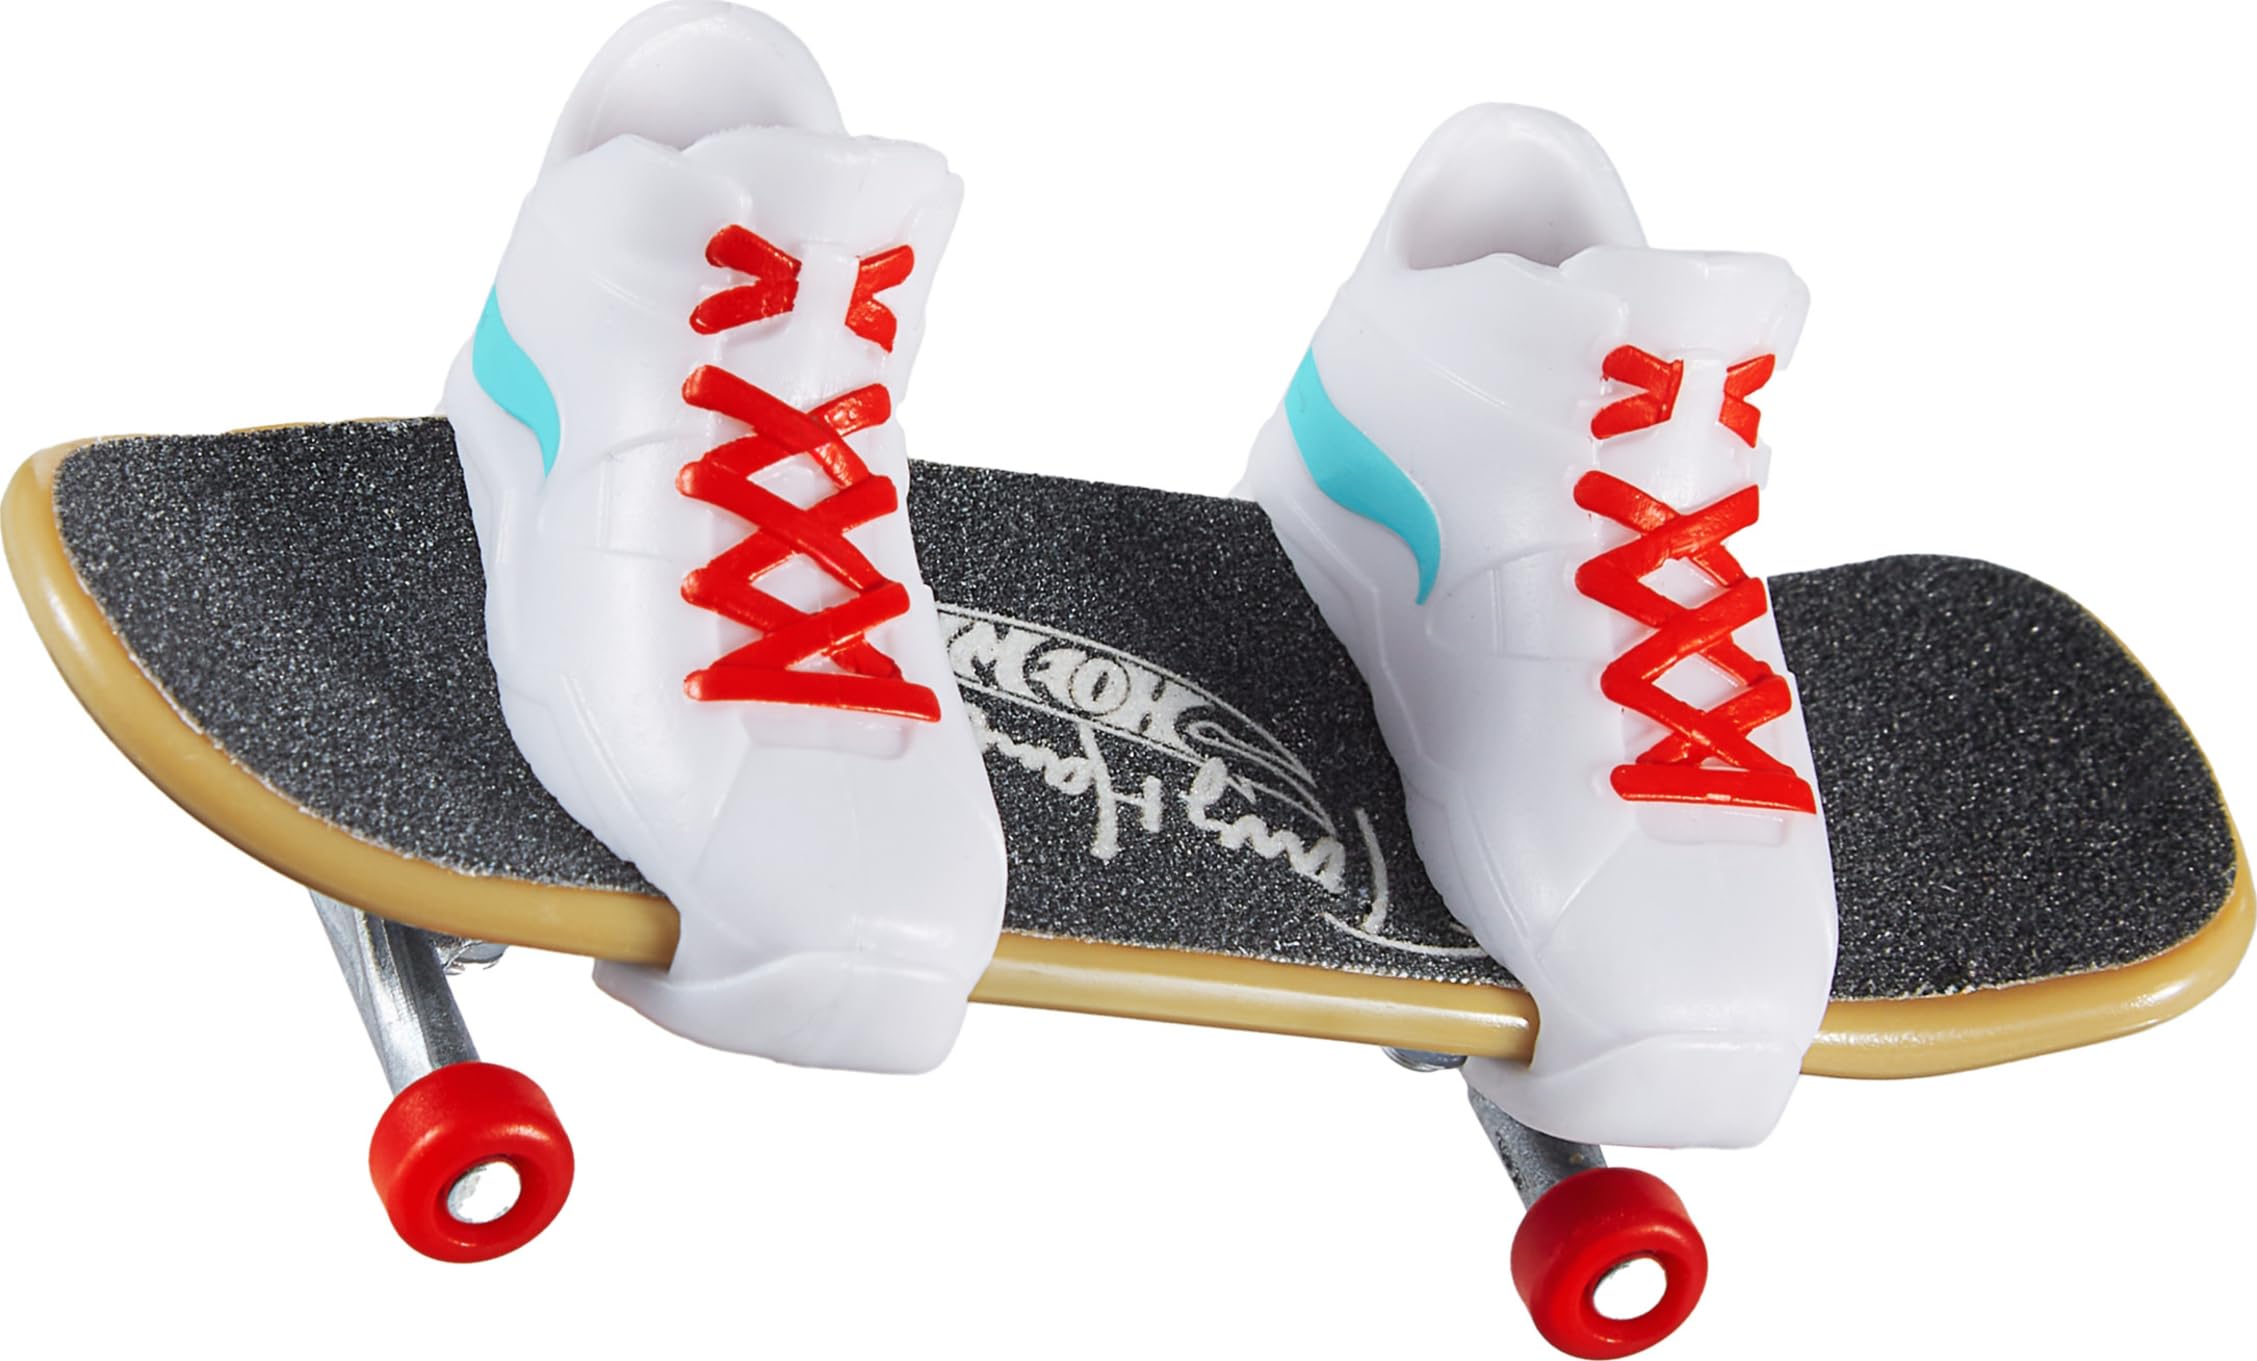 Hot Wheels Skate Tony Hawk Fingerboard & Removable Skate Shoes Multipack, 4 Fully Assembled Boards, 2 Pairs of Skate Shoes, 1 Exclusive Set (Styles May Vary)